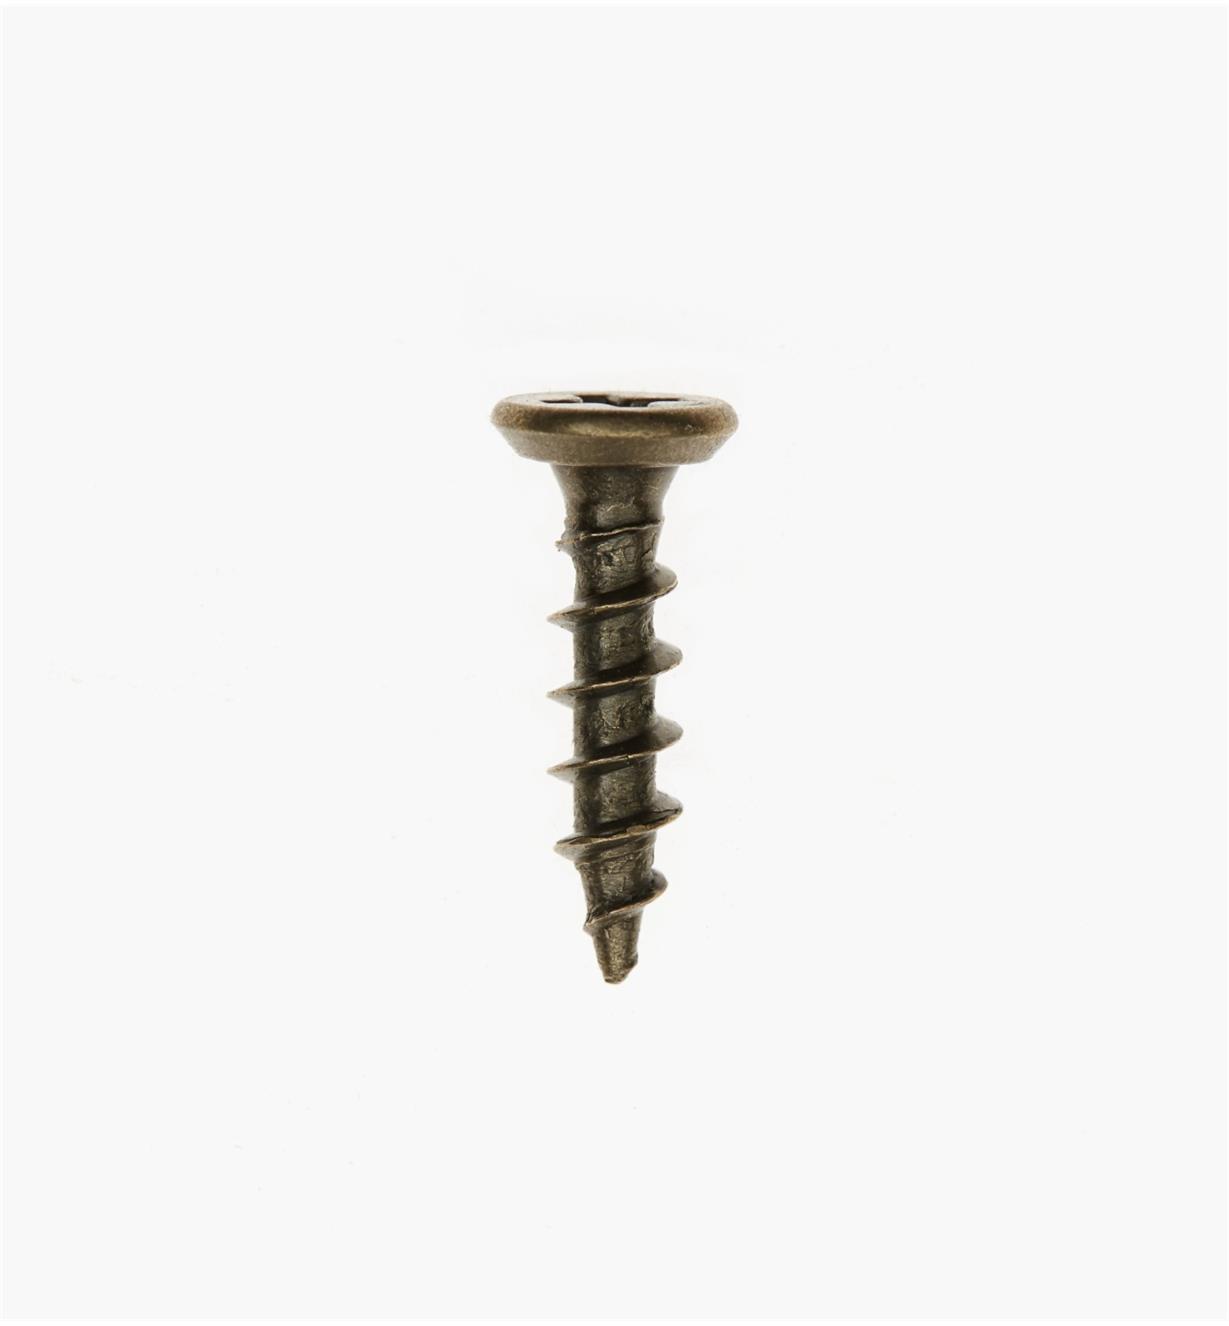 Side view of #6 × 5/8" Antique Brass Hinge Screw